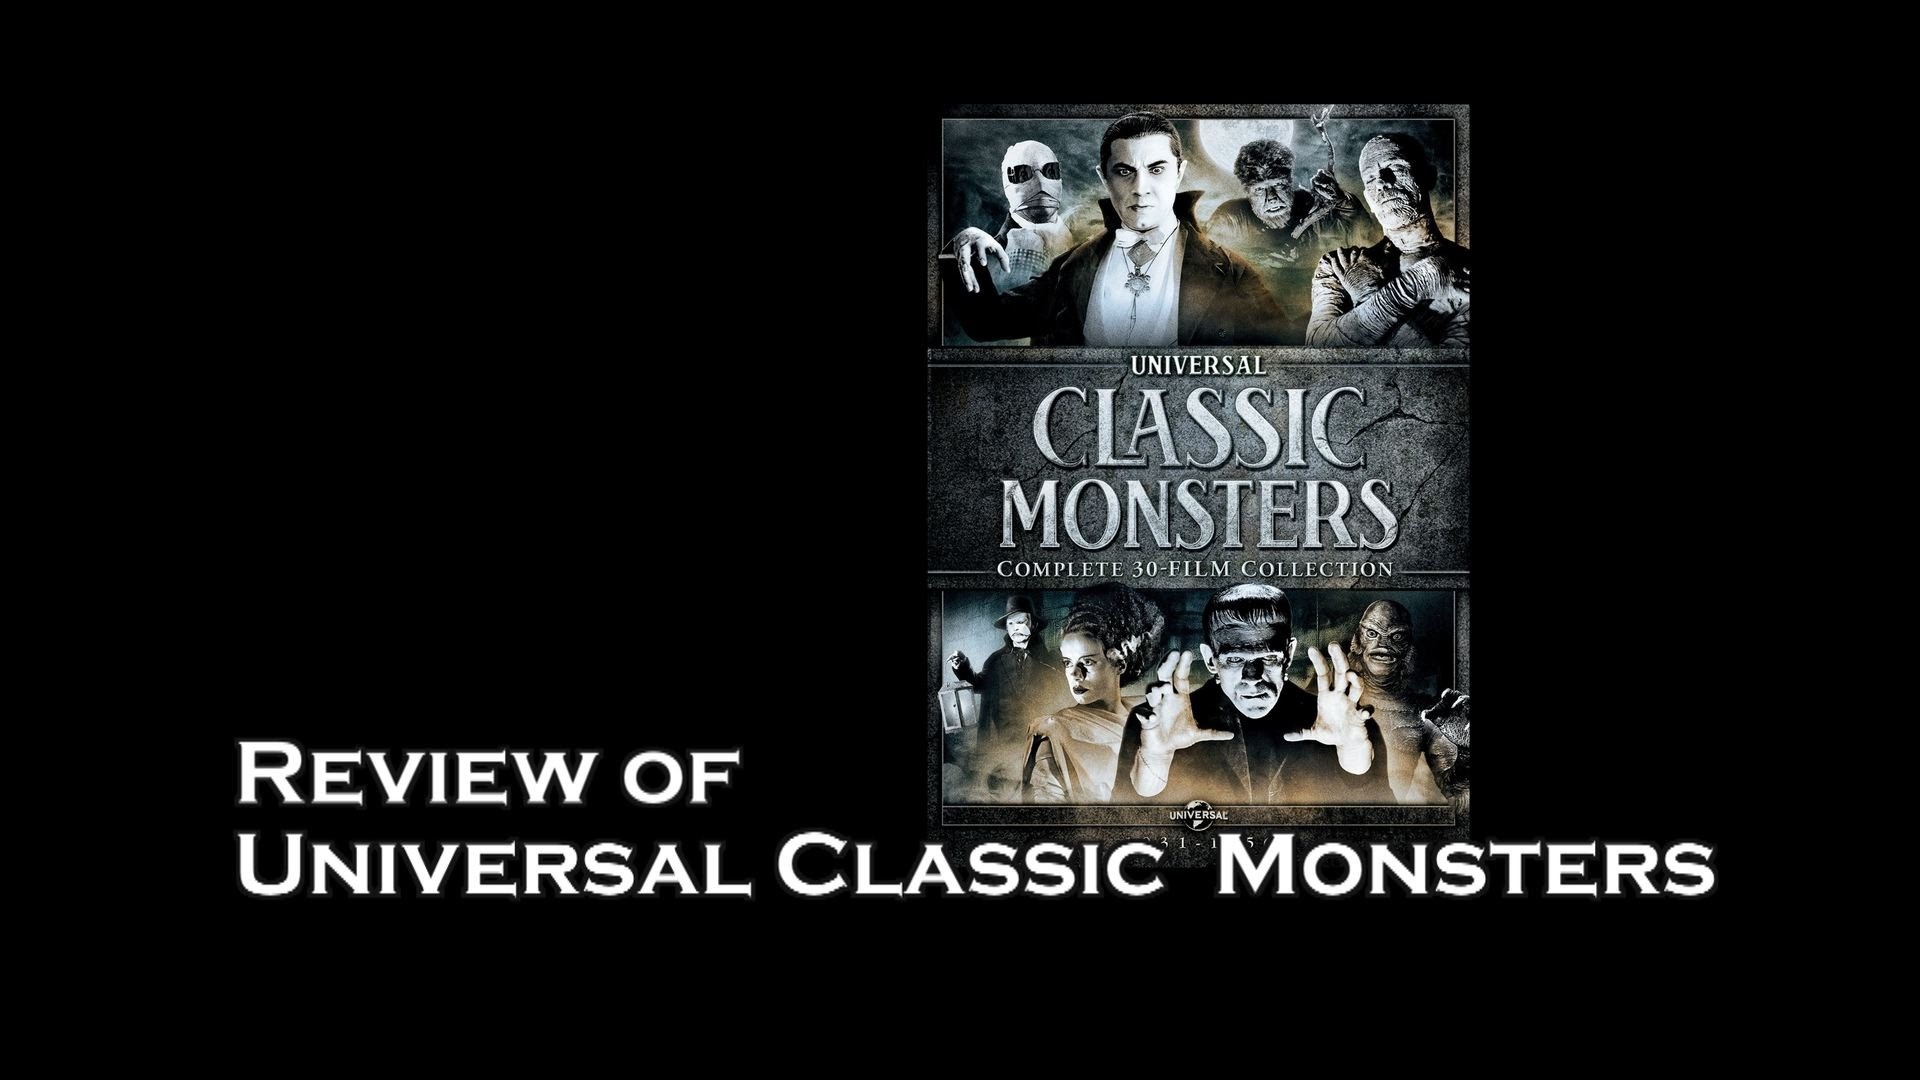 1920x1080 DVD Movie Box Set Review : Universal Classic Monster Horror Movies - YouTube